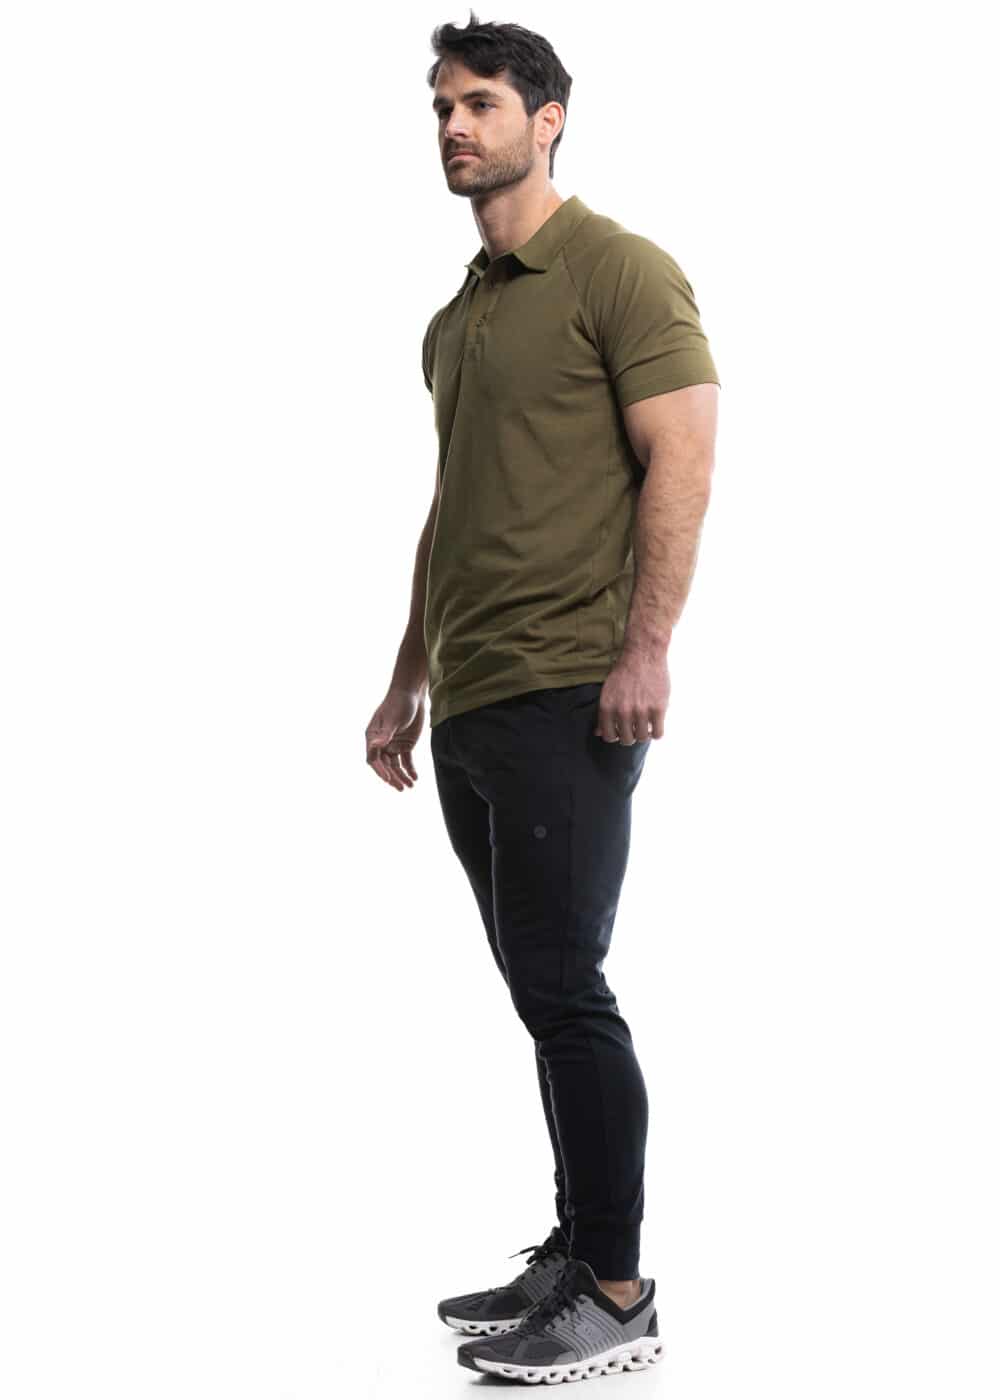 Man modeling Performance CC Jogger and Classic Pique Polo from the Alexo Athletica x Springfield Armory collection